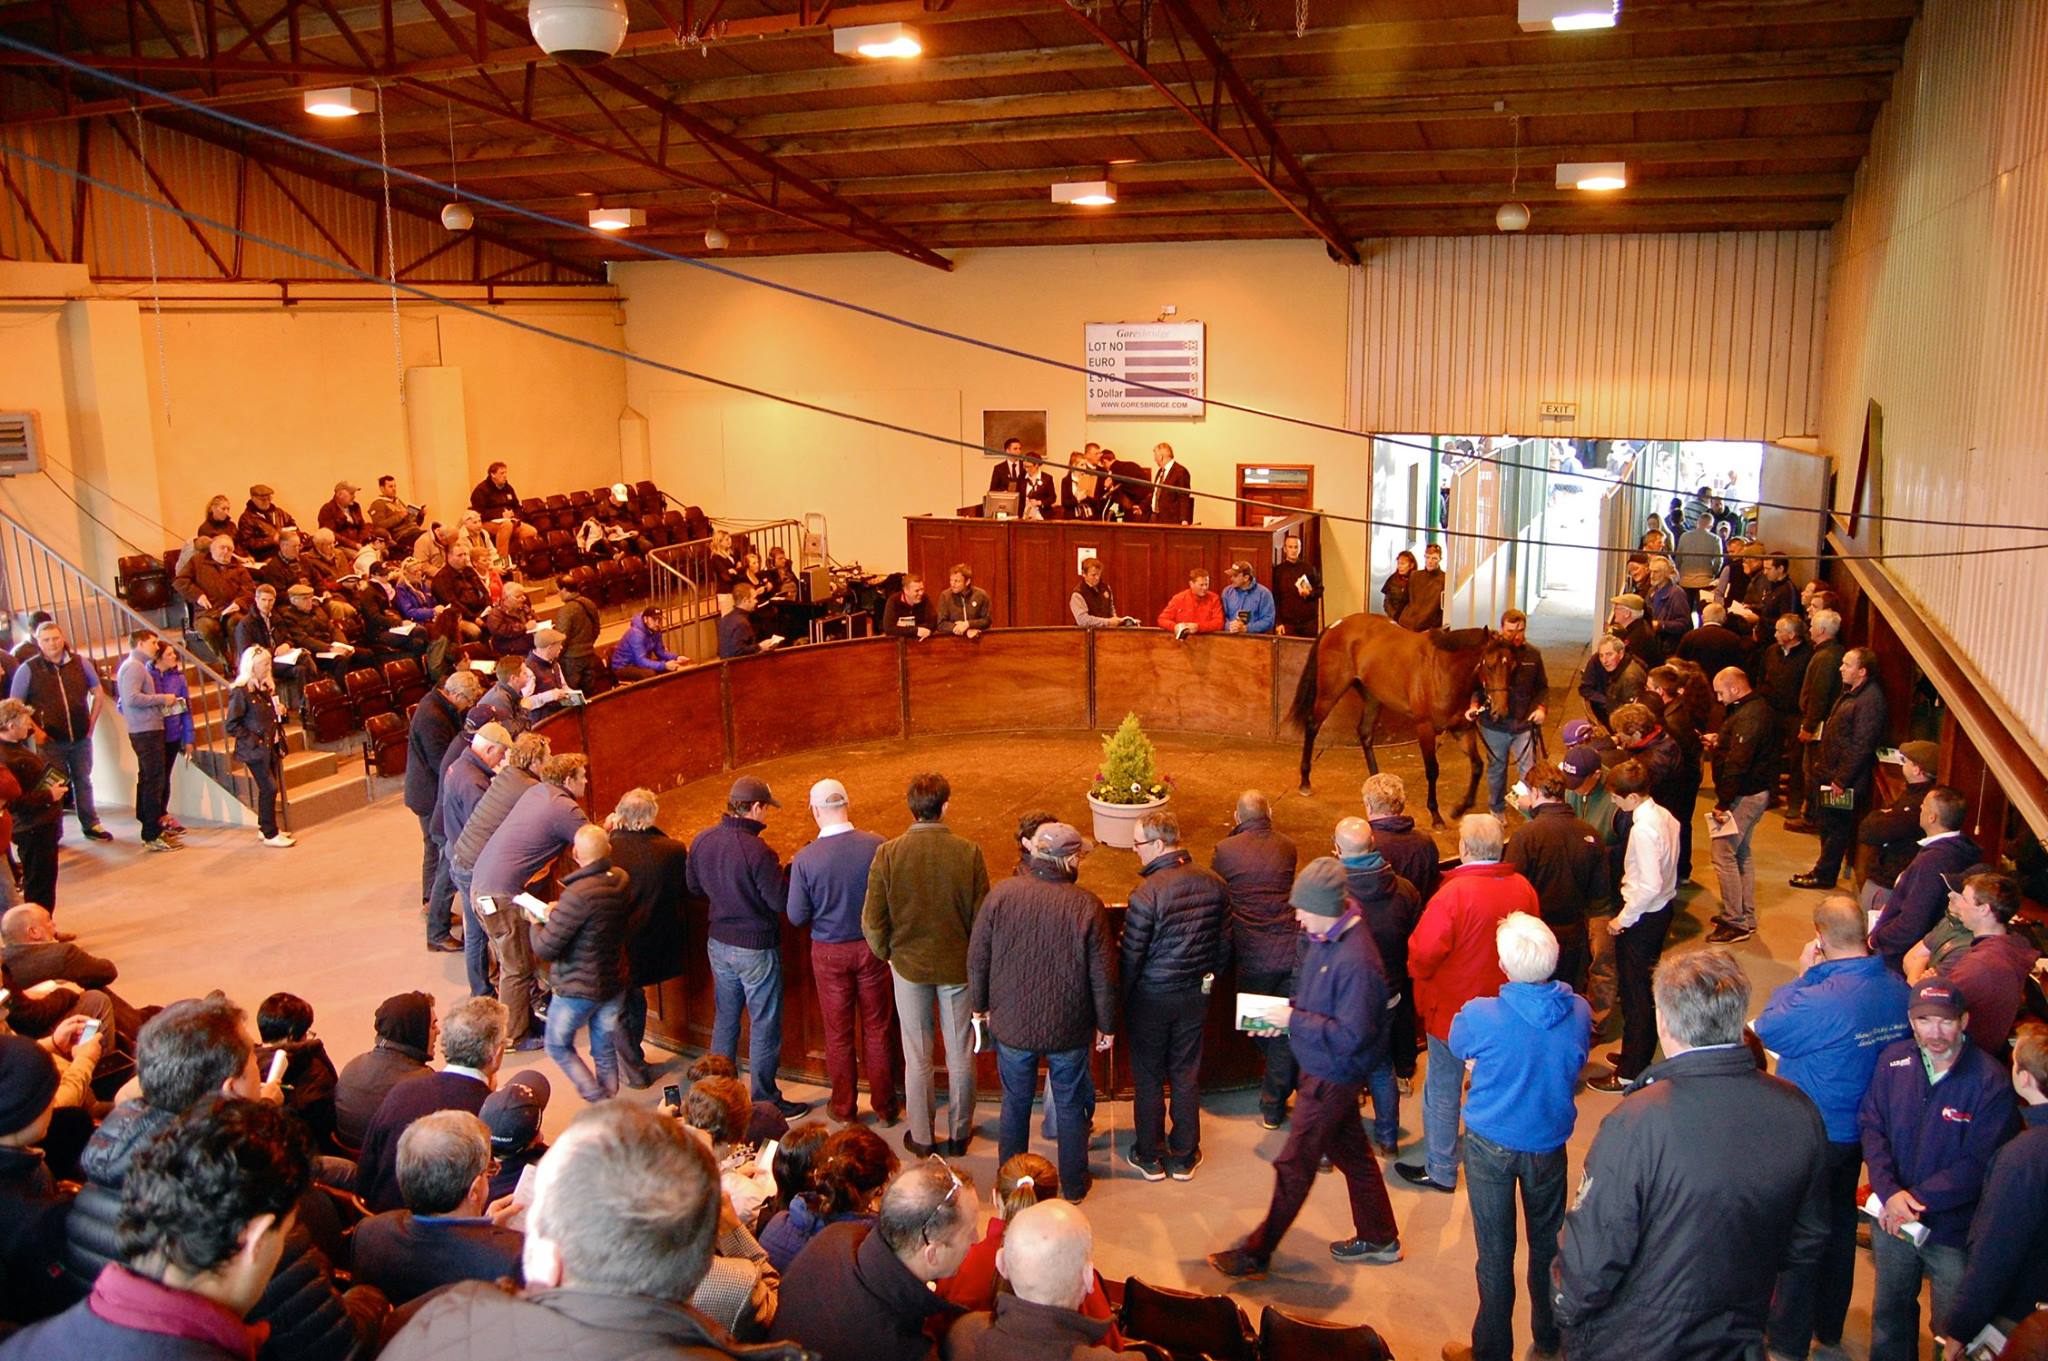 Hive of activity: the sale ring at Goresbridge in County Kilkenny. Photo: Amy Lynam